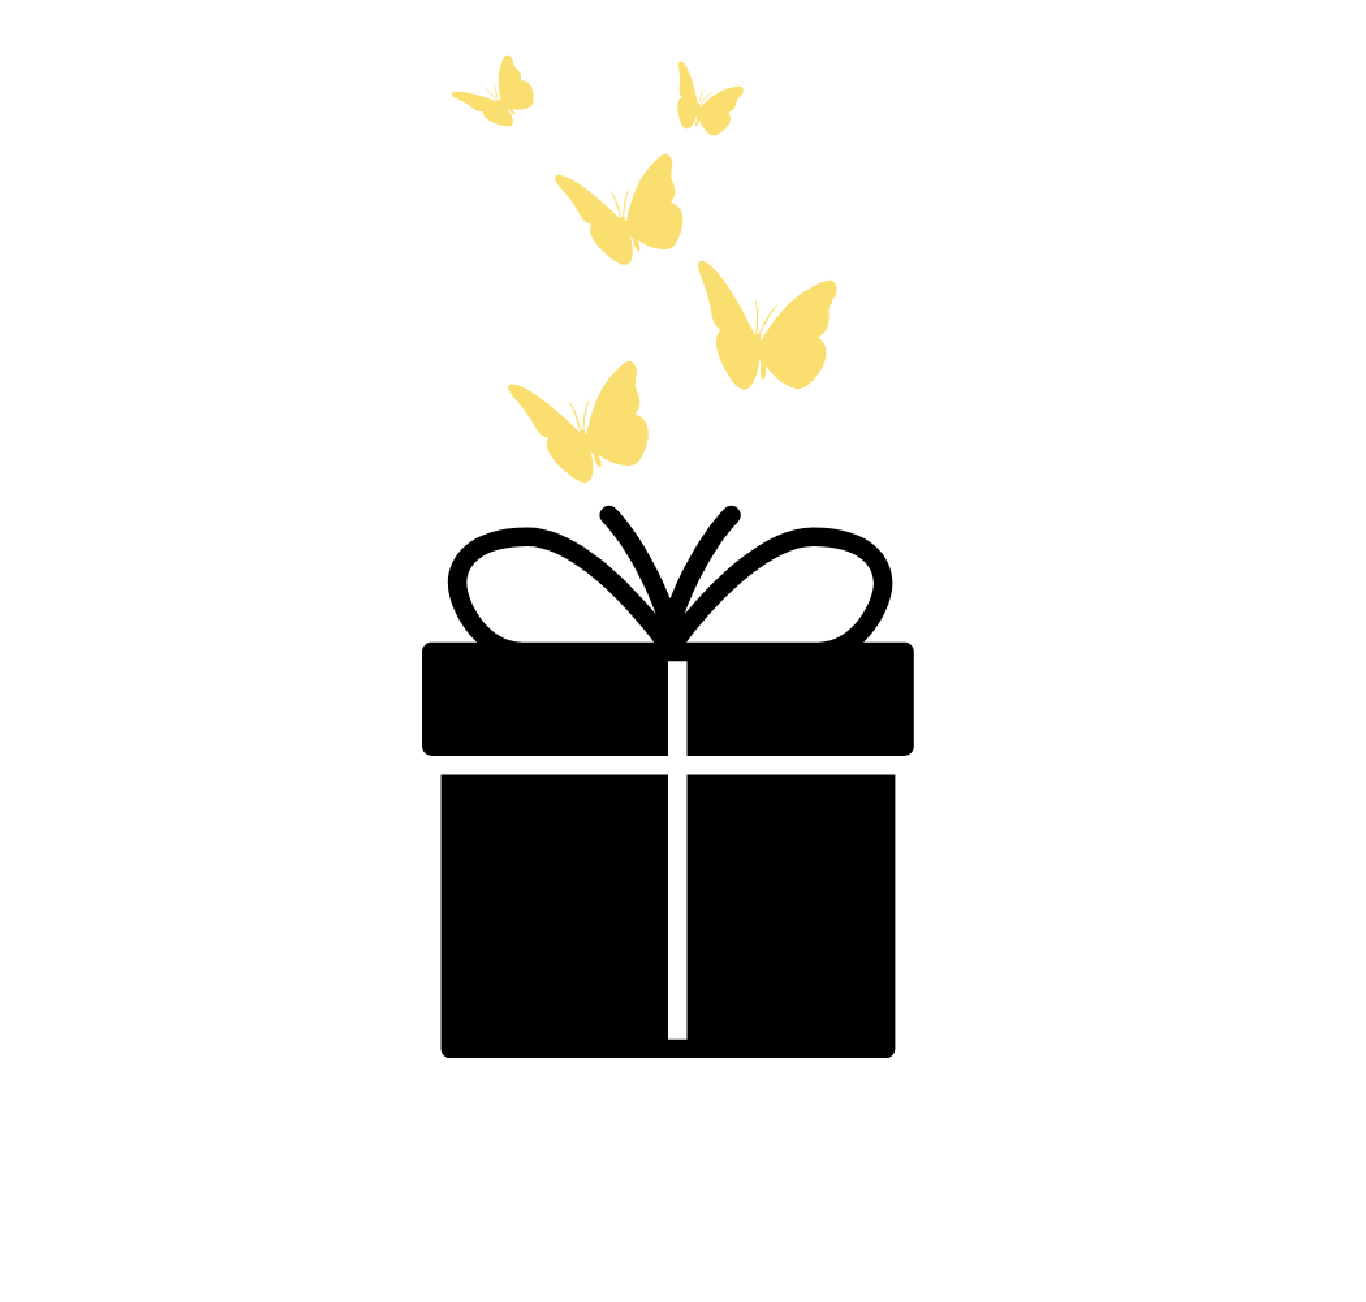 Image of a black gift box with yellow butterflies emerging from it.